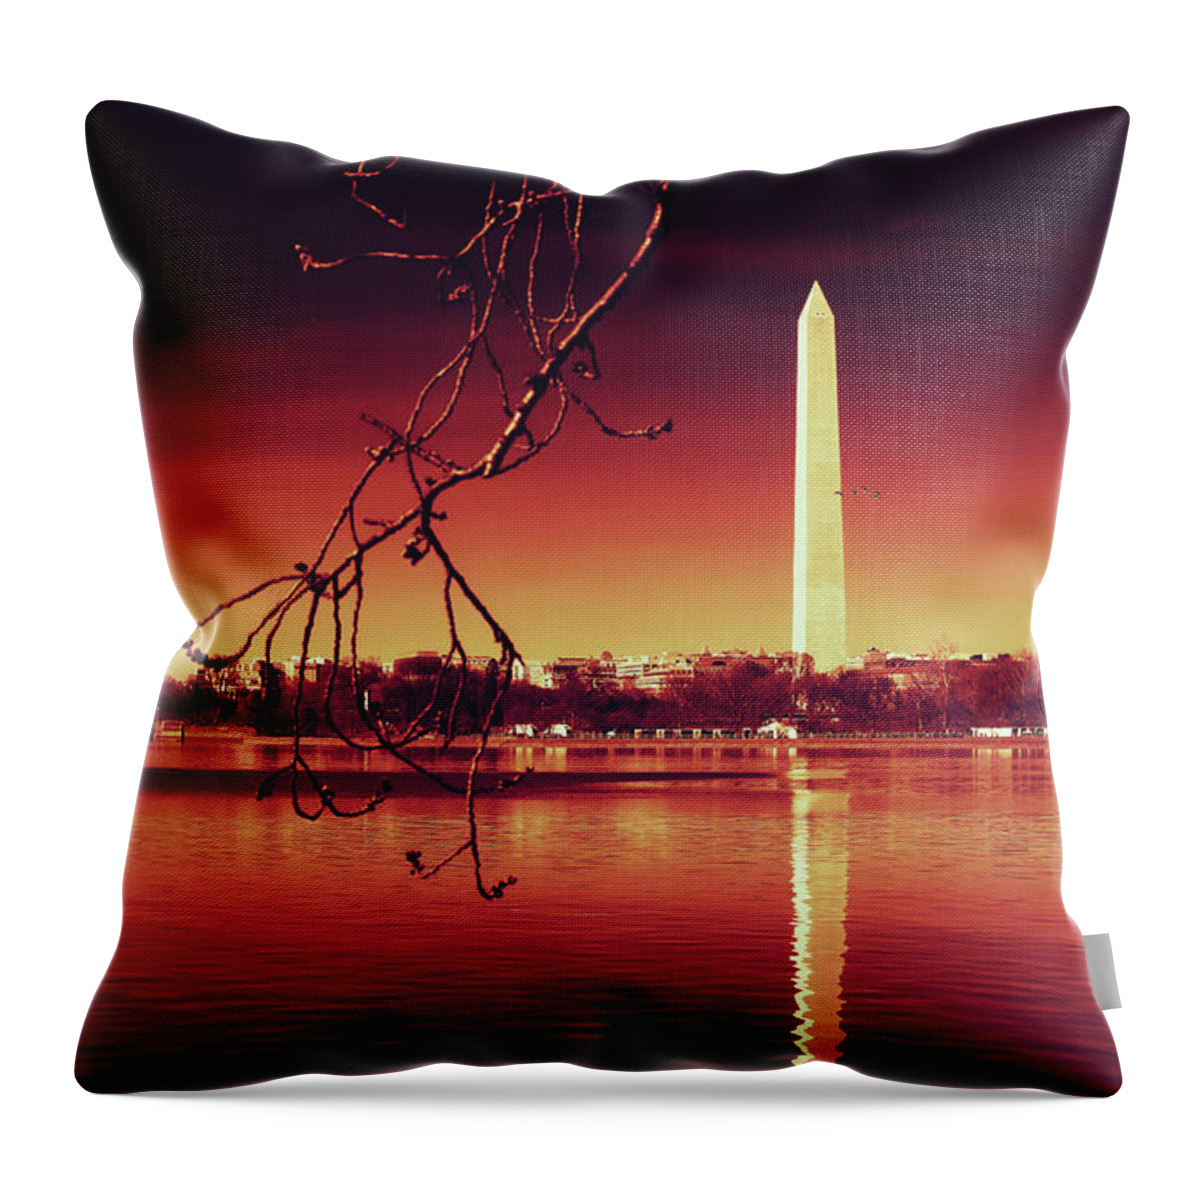 Washington Throw Pillow featuring the photograph Line Up by Iryna Goodall